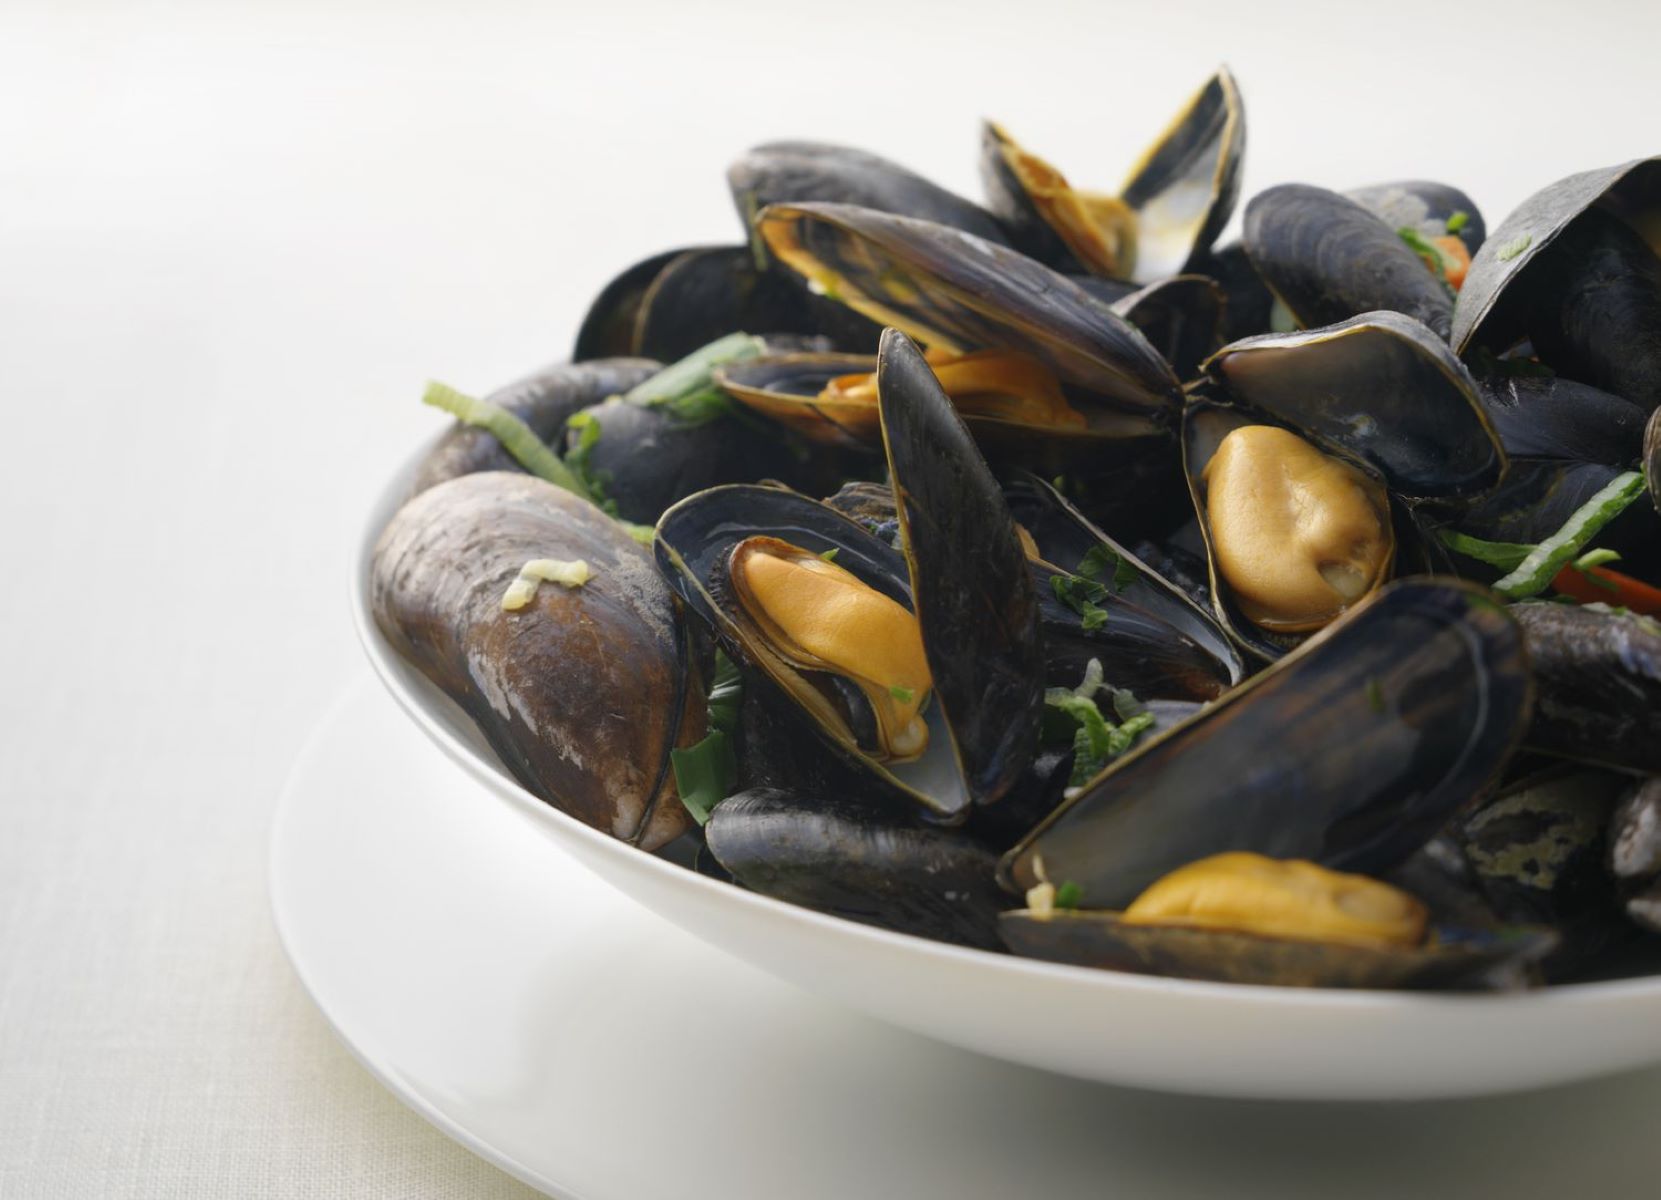 The Ultimate Showdown: Black Mussels Vs. New Zealand Mussels - Which Reigns Supreme In Taste And Texture?